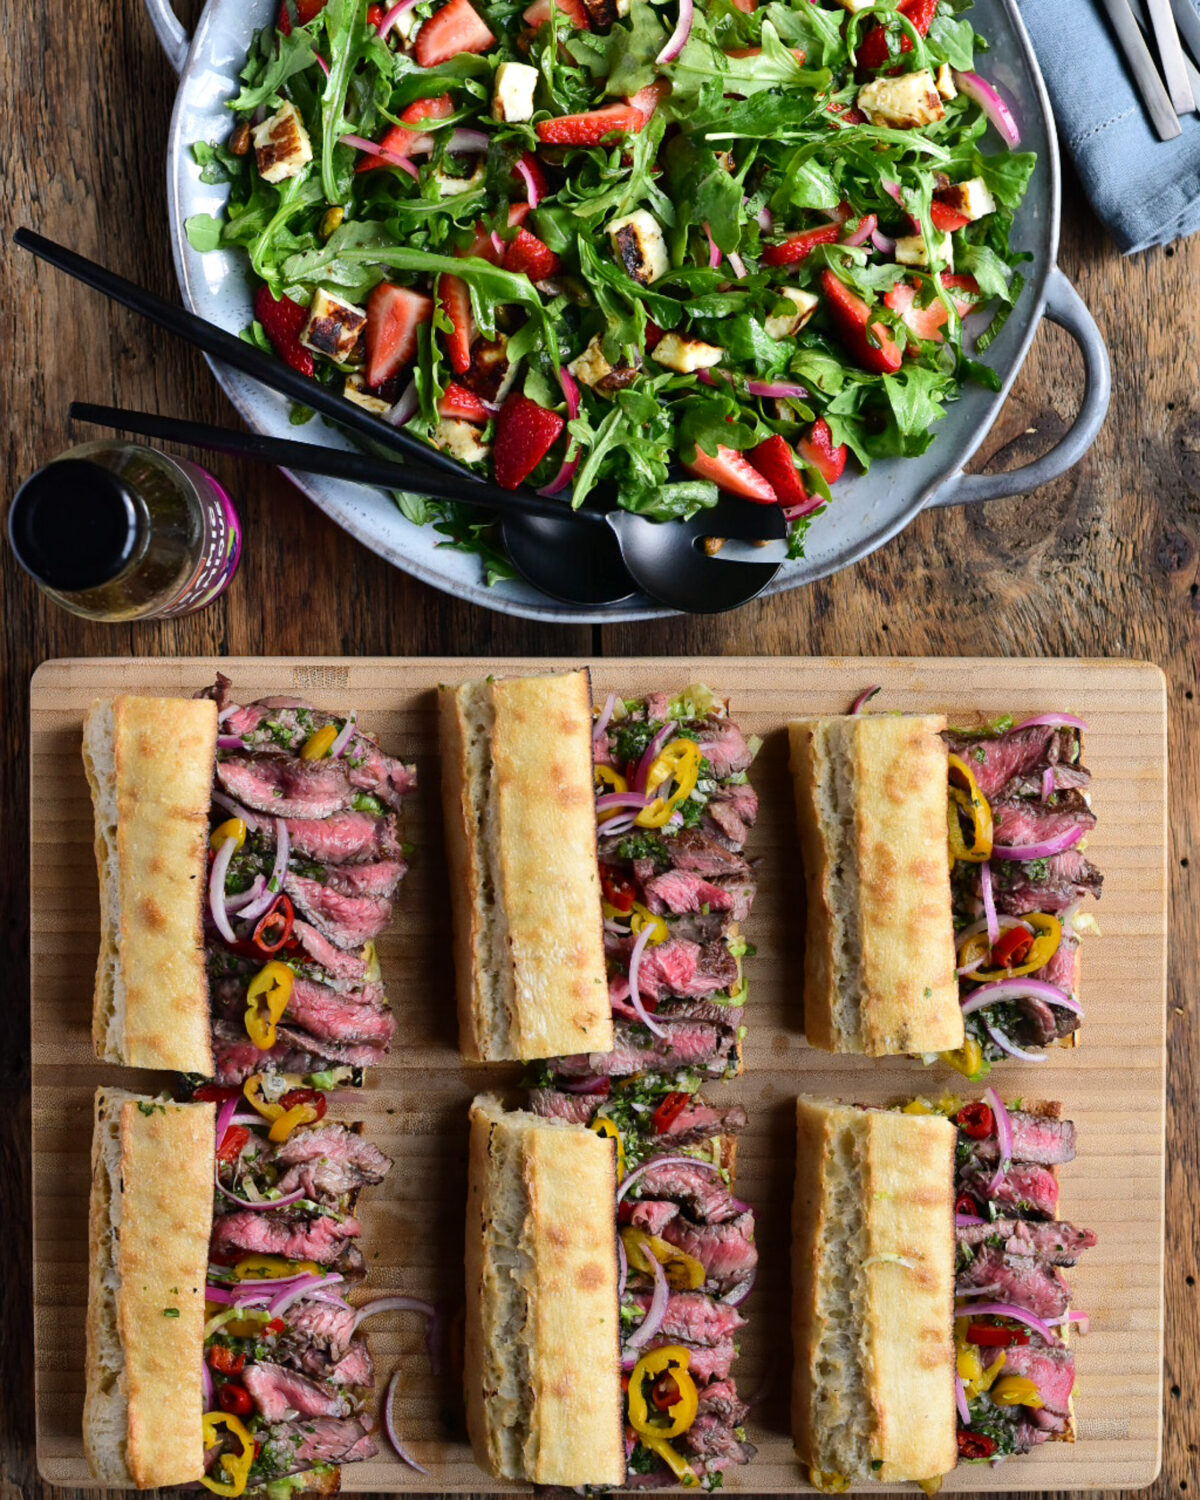 Six grilled steak sandwiches with a with A Grilled Halloumi & Strawberry Salad